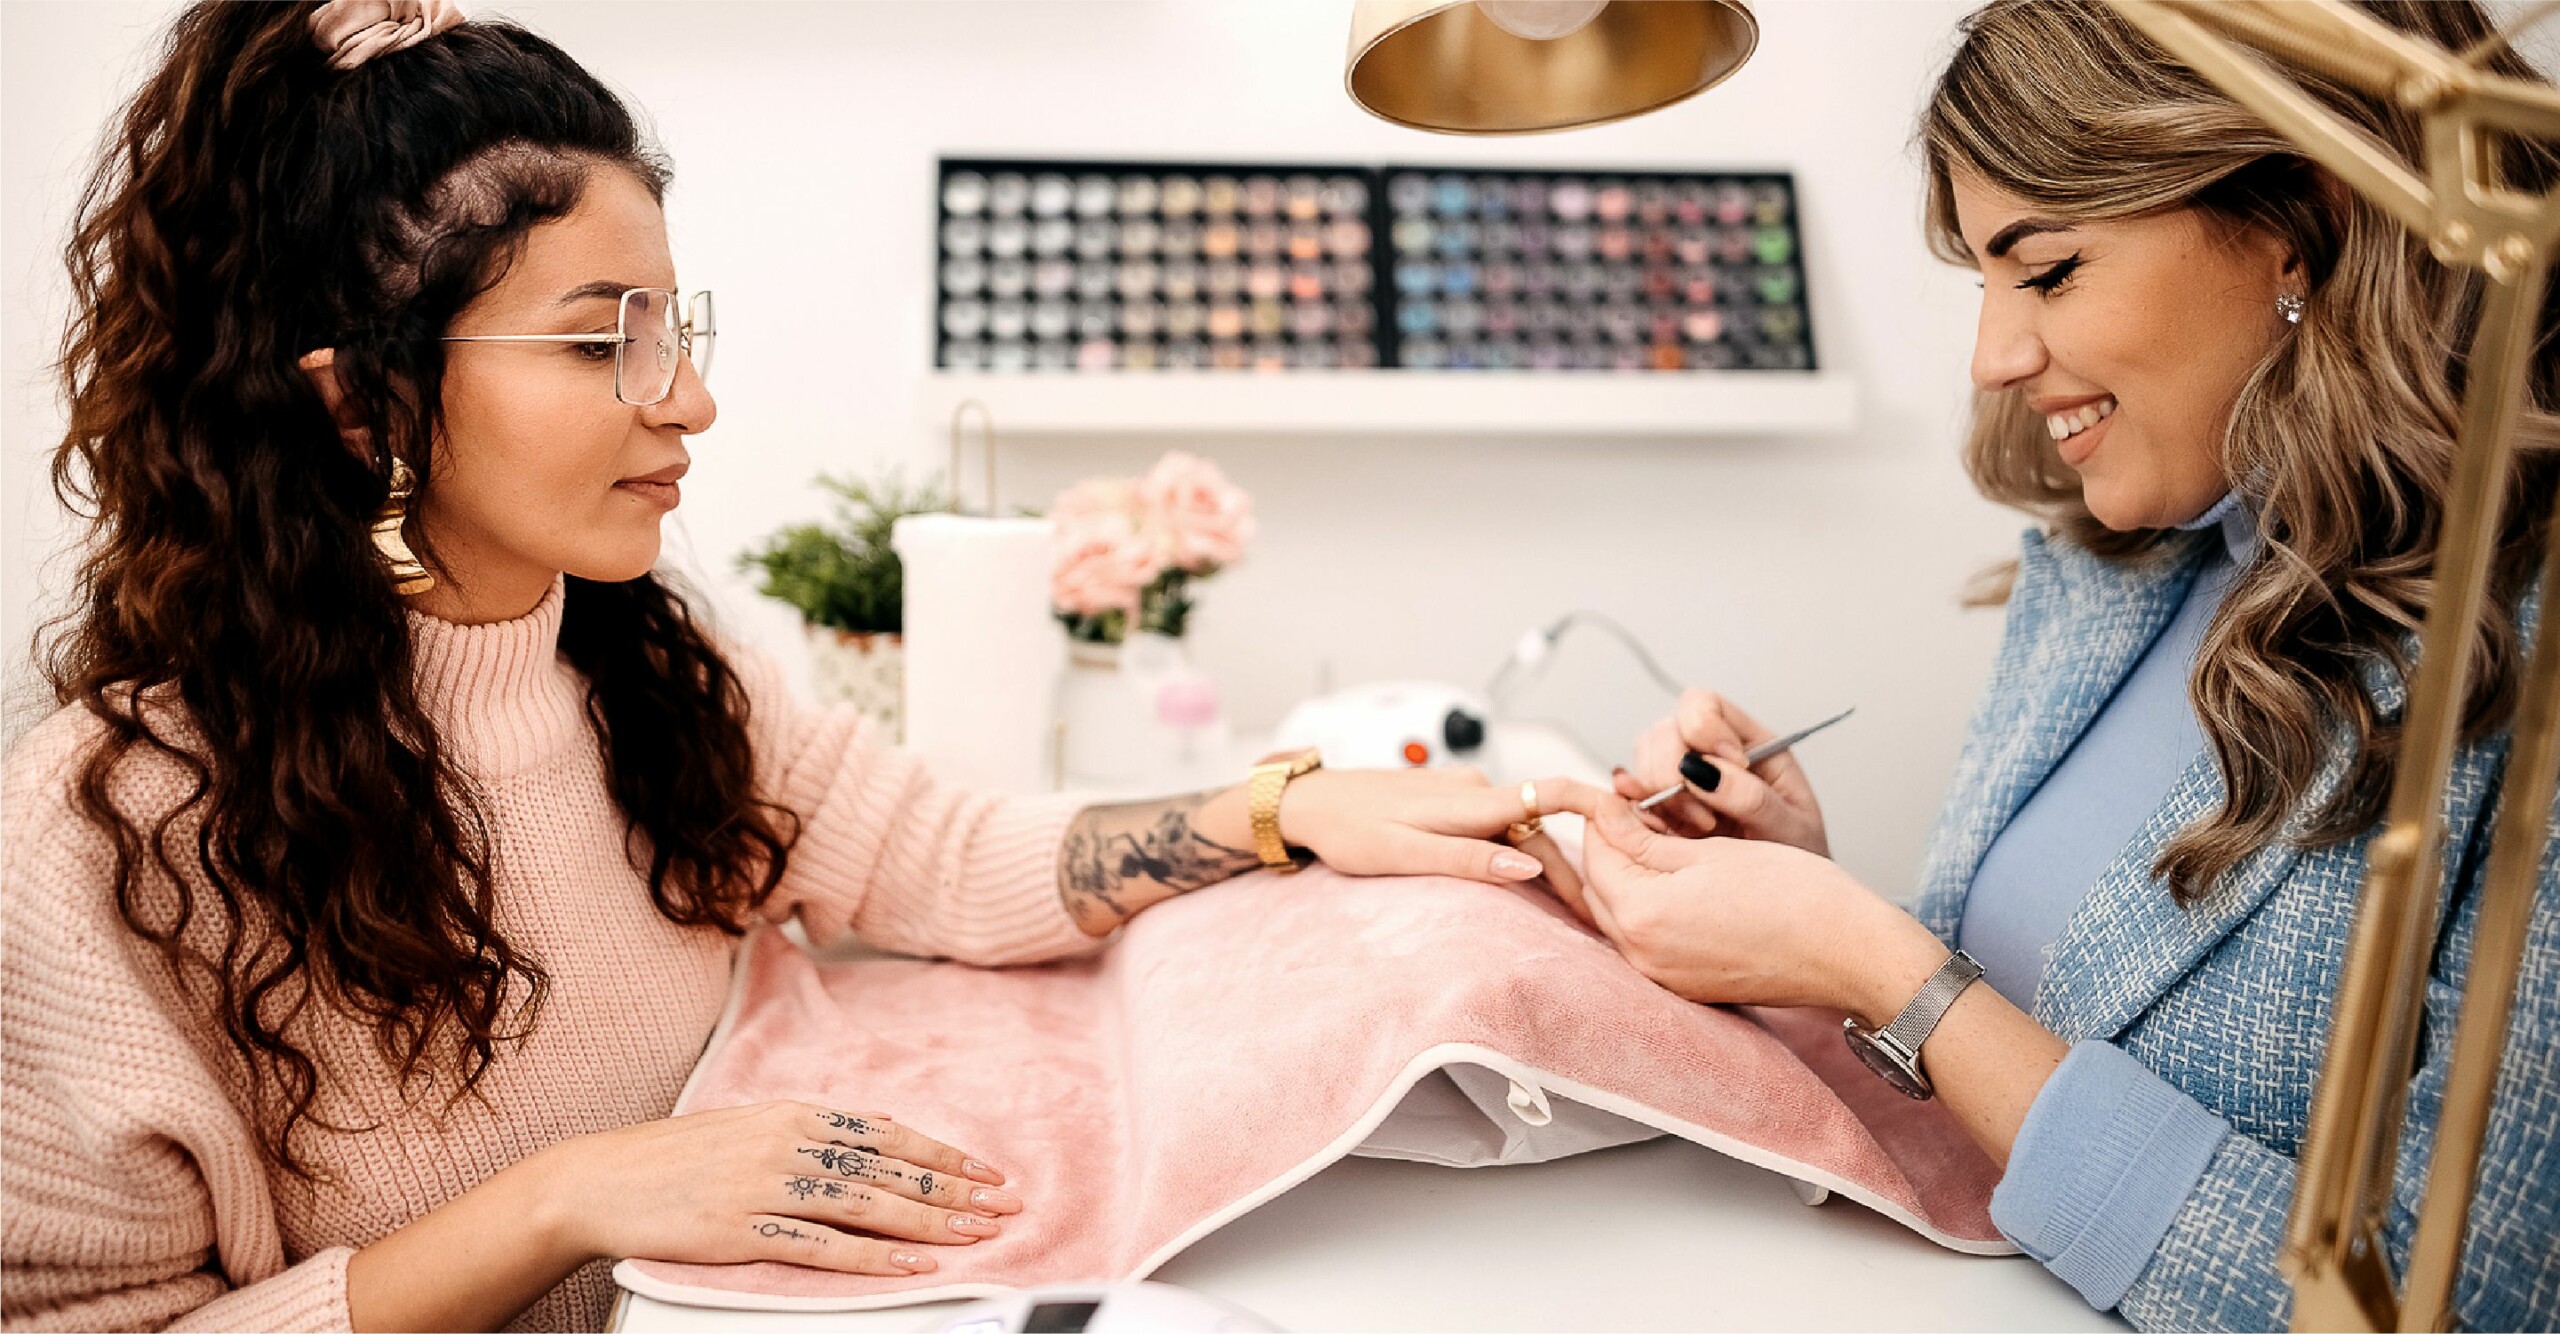 Woman gets her nails painted at salon